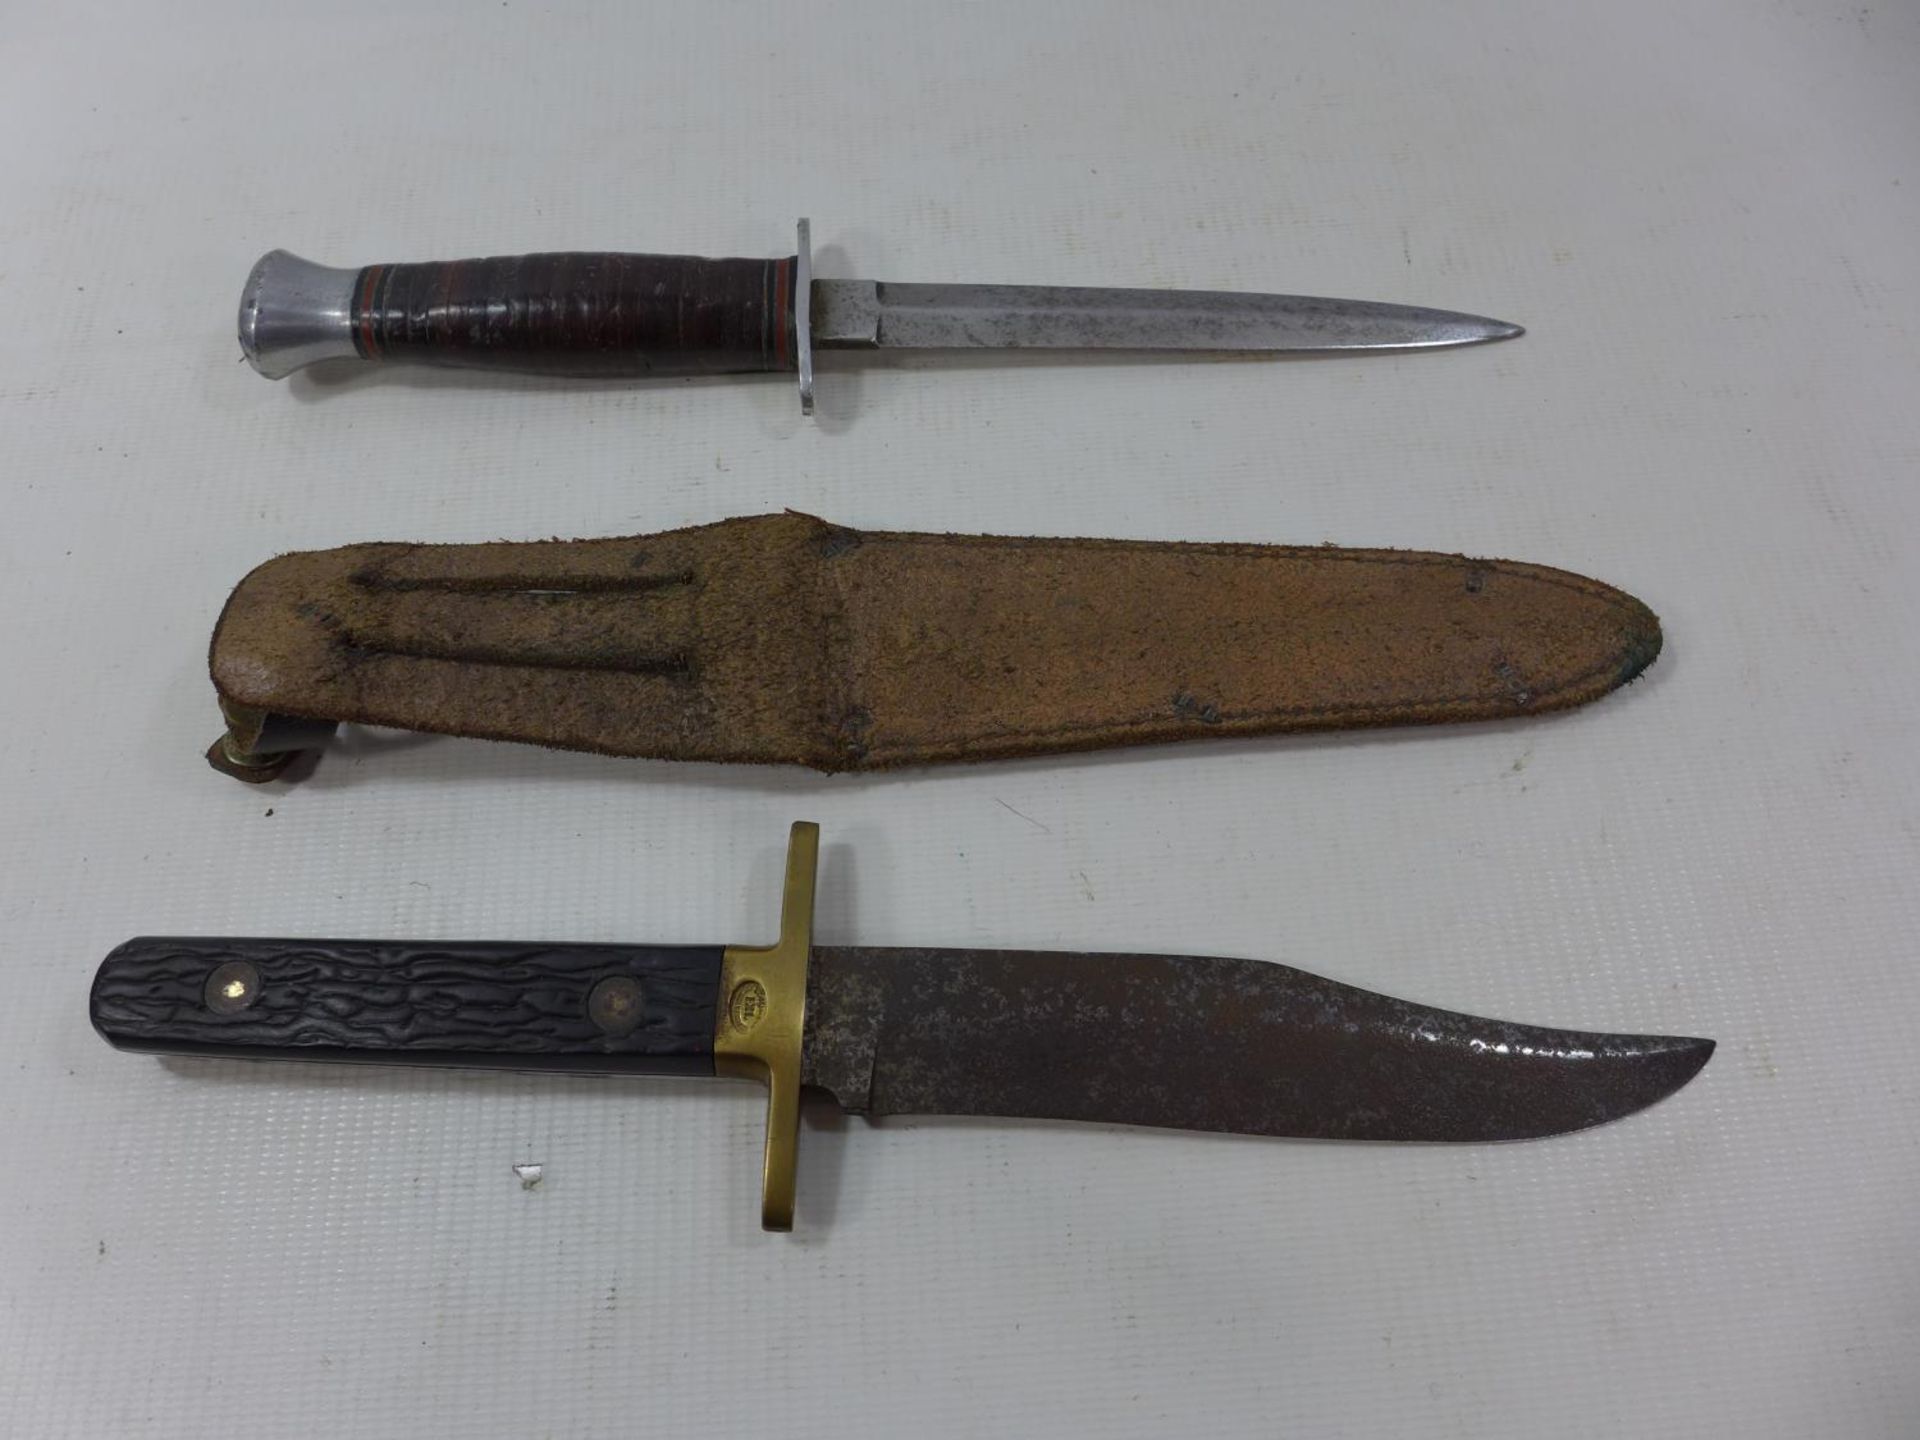 A SHEFFIELD MADE IXL BOWIE KNIFE, 15CM BLADE AND ANOTHER KNIFE, 15CM BLADE, LEATHER SCABBARD - Image 2 of 3